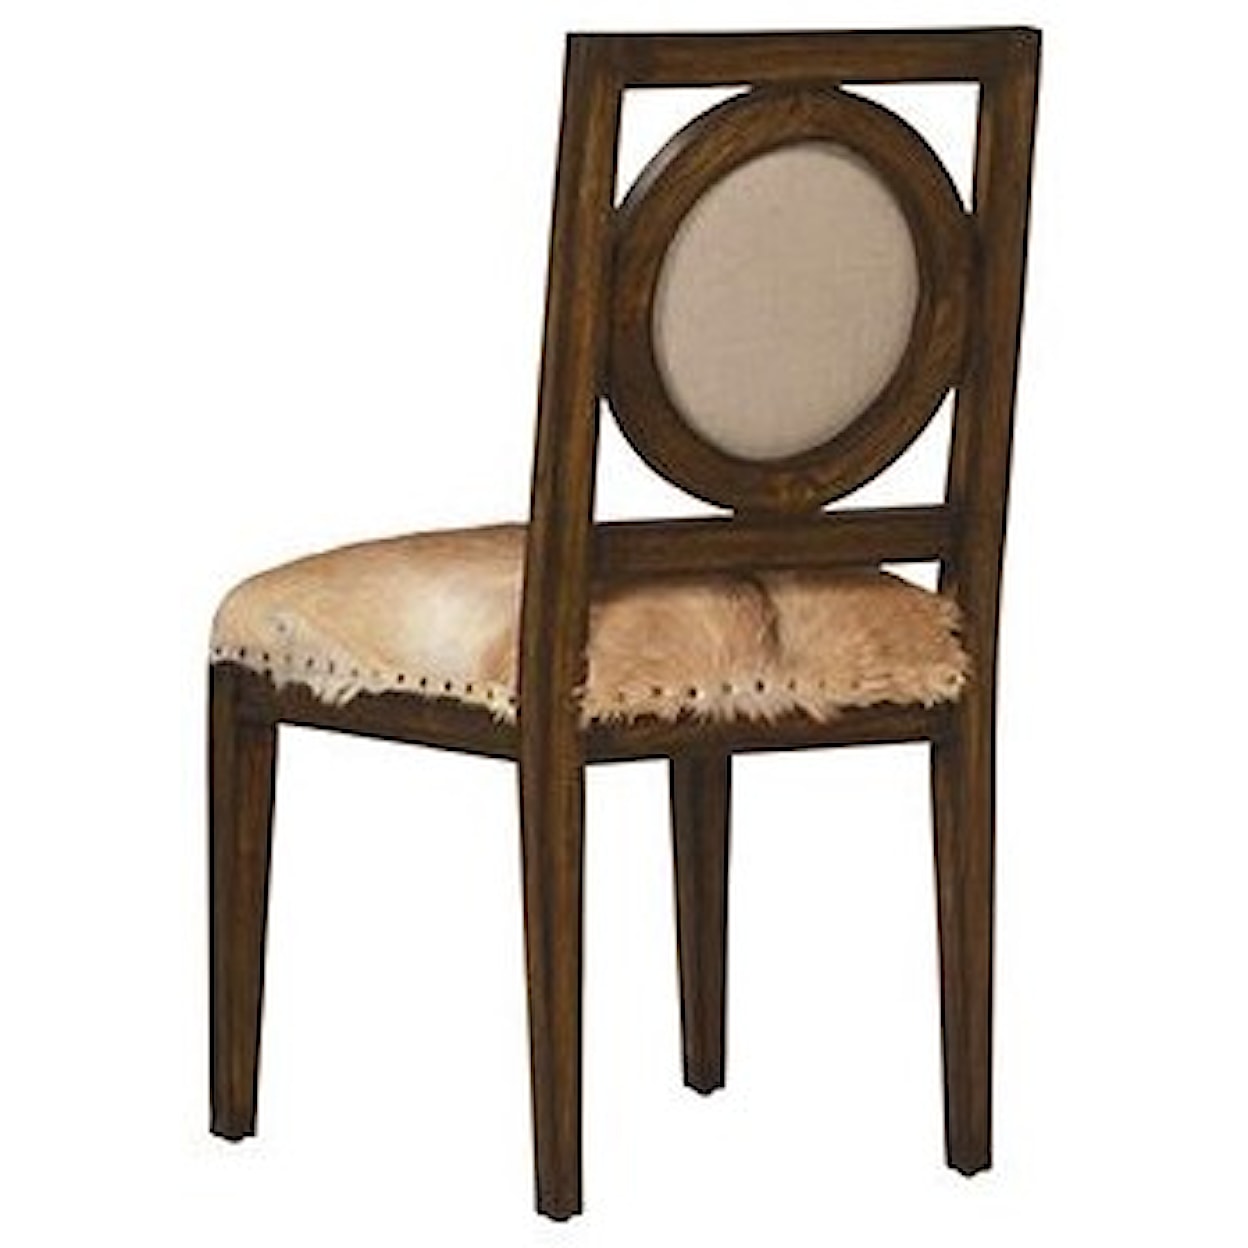 Dovetail Furniture Dining Chairs Camino Dining Chair